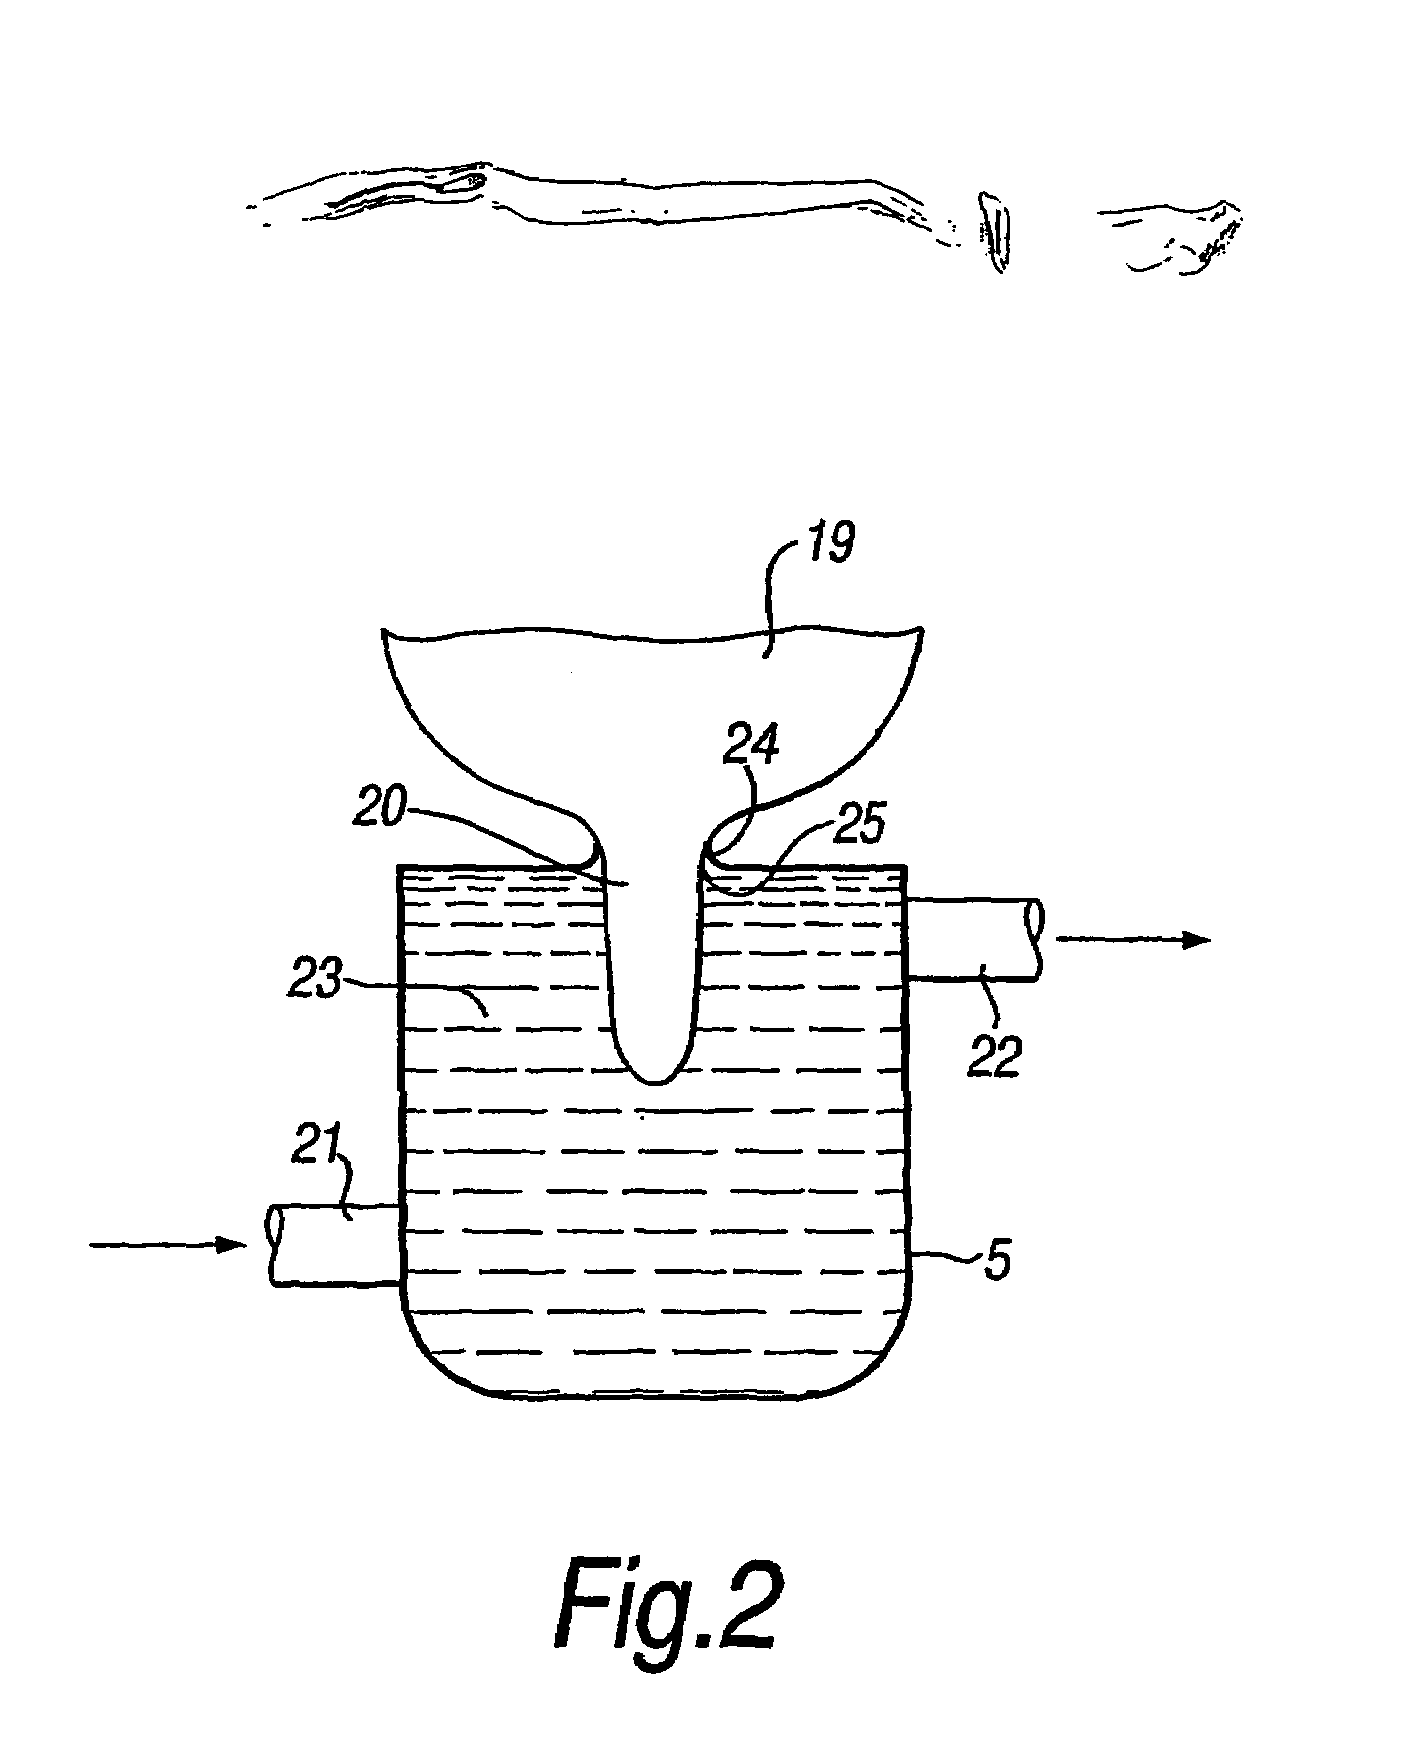 Method and apparatus for treating the teats of an animal